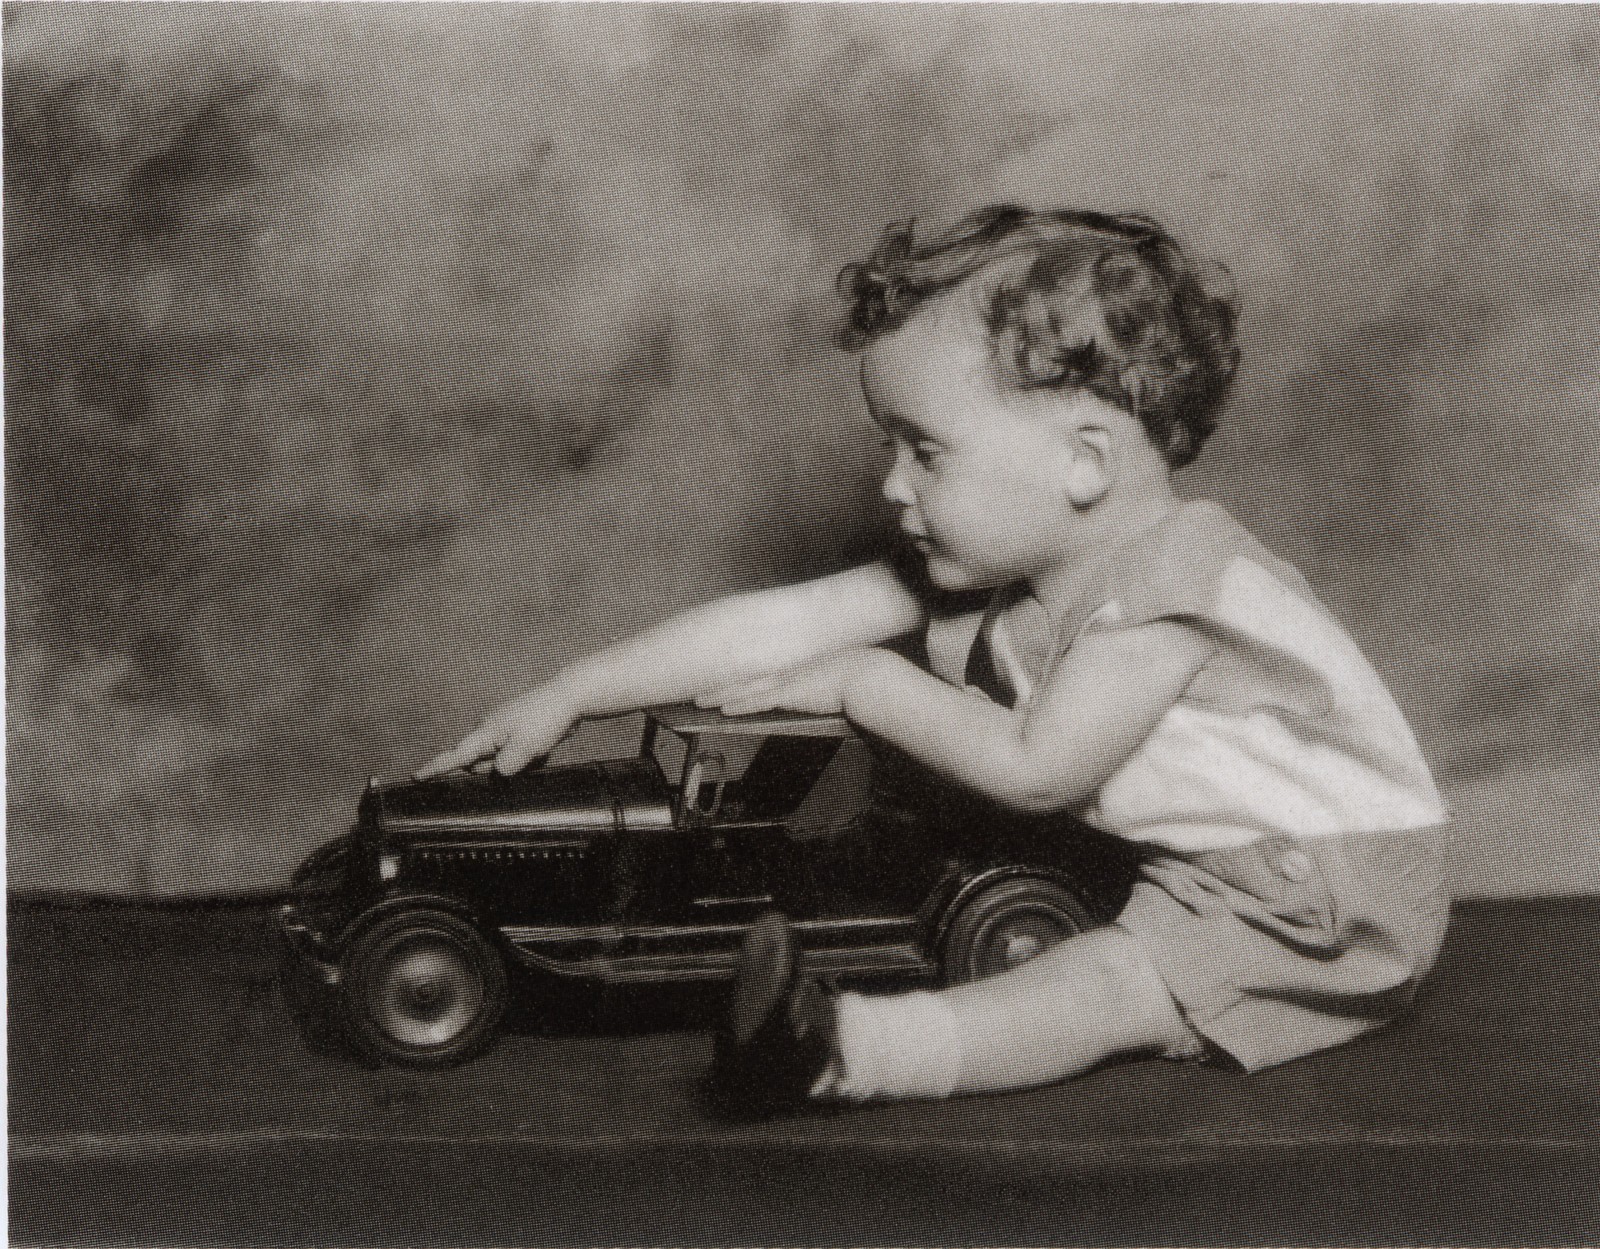 A black and white photograph of Robert Clark as a young child playing with a toy car